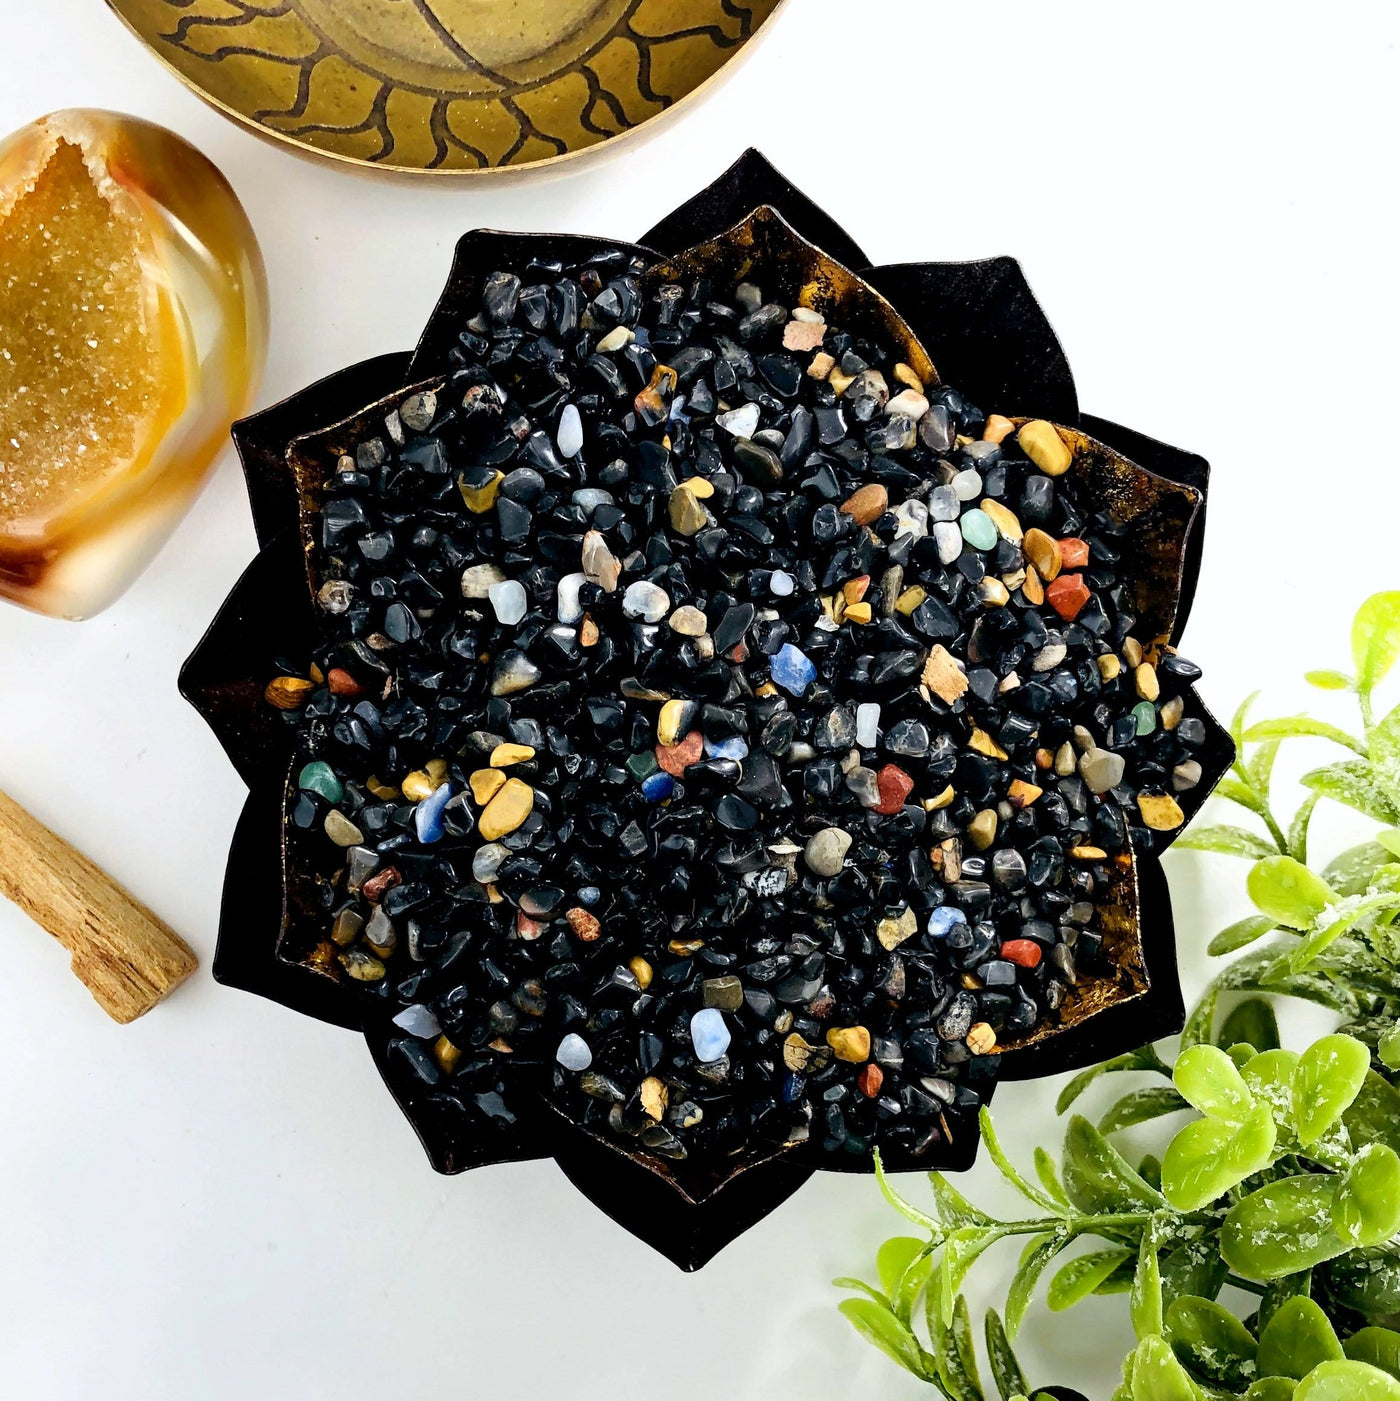 Black onyx chips in a lotus bowl.  They are mixed with a few other colorful stones.